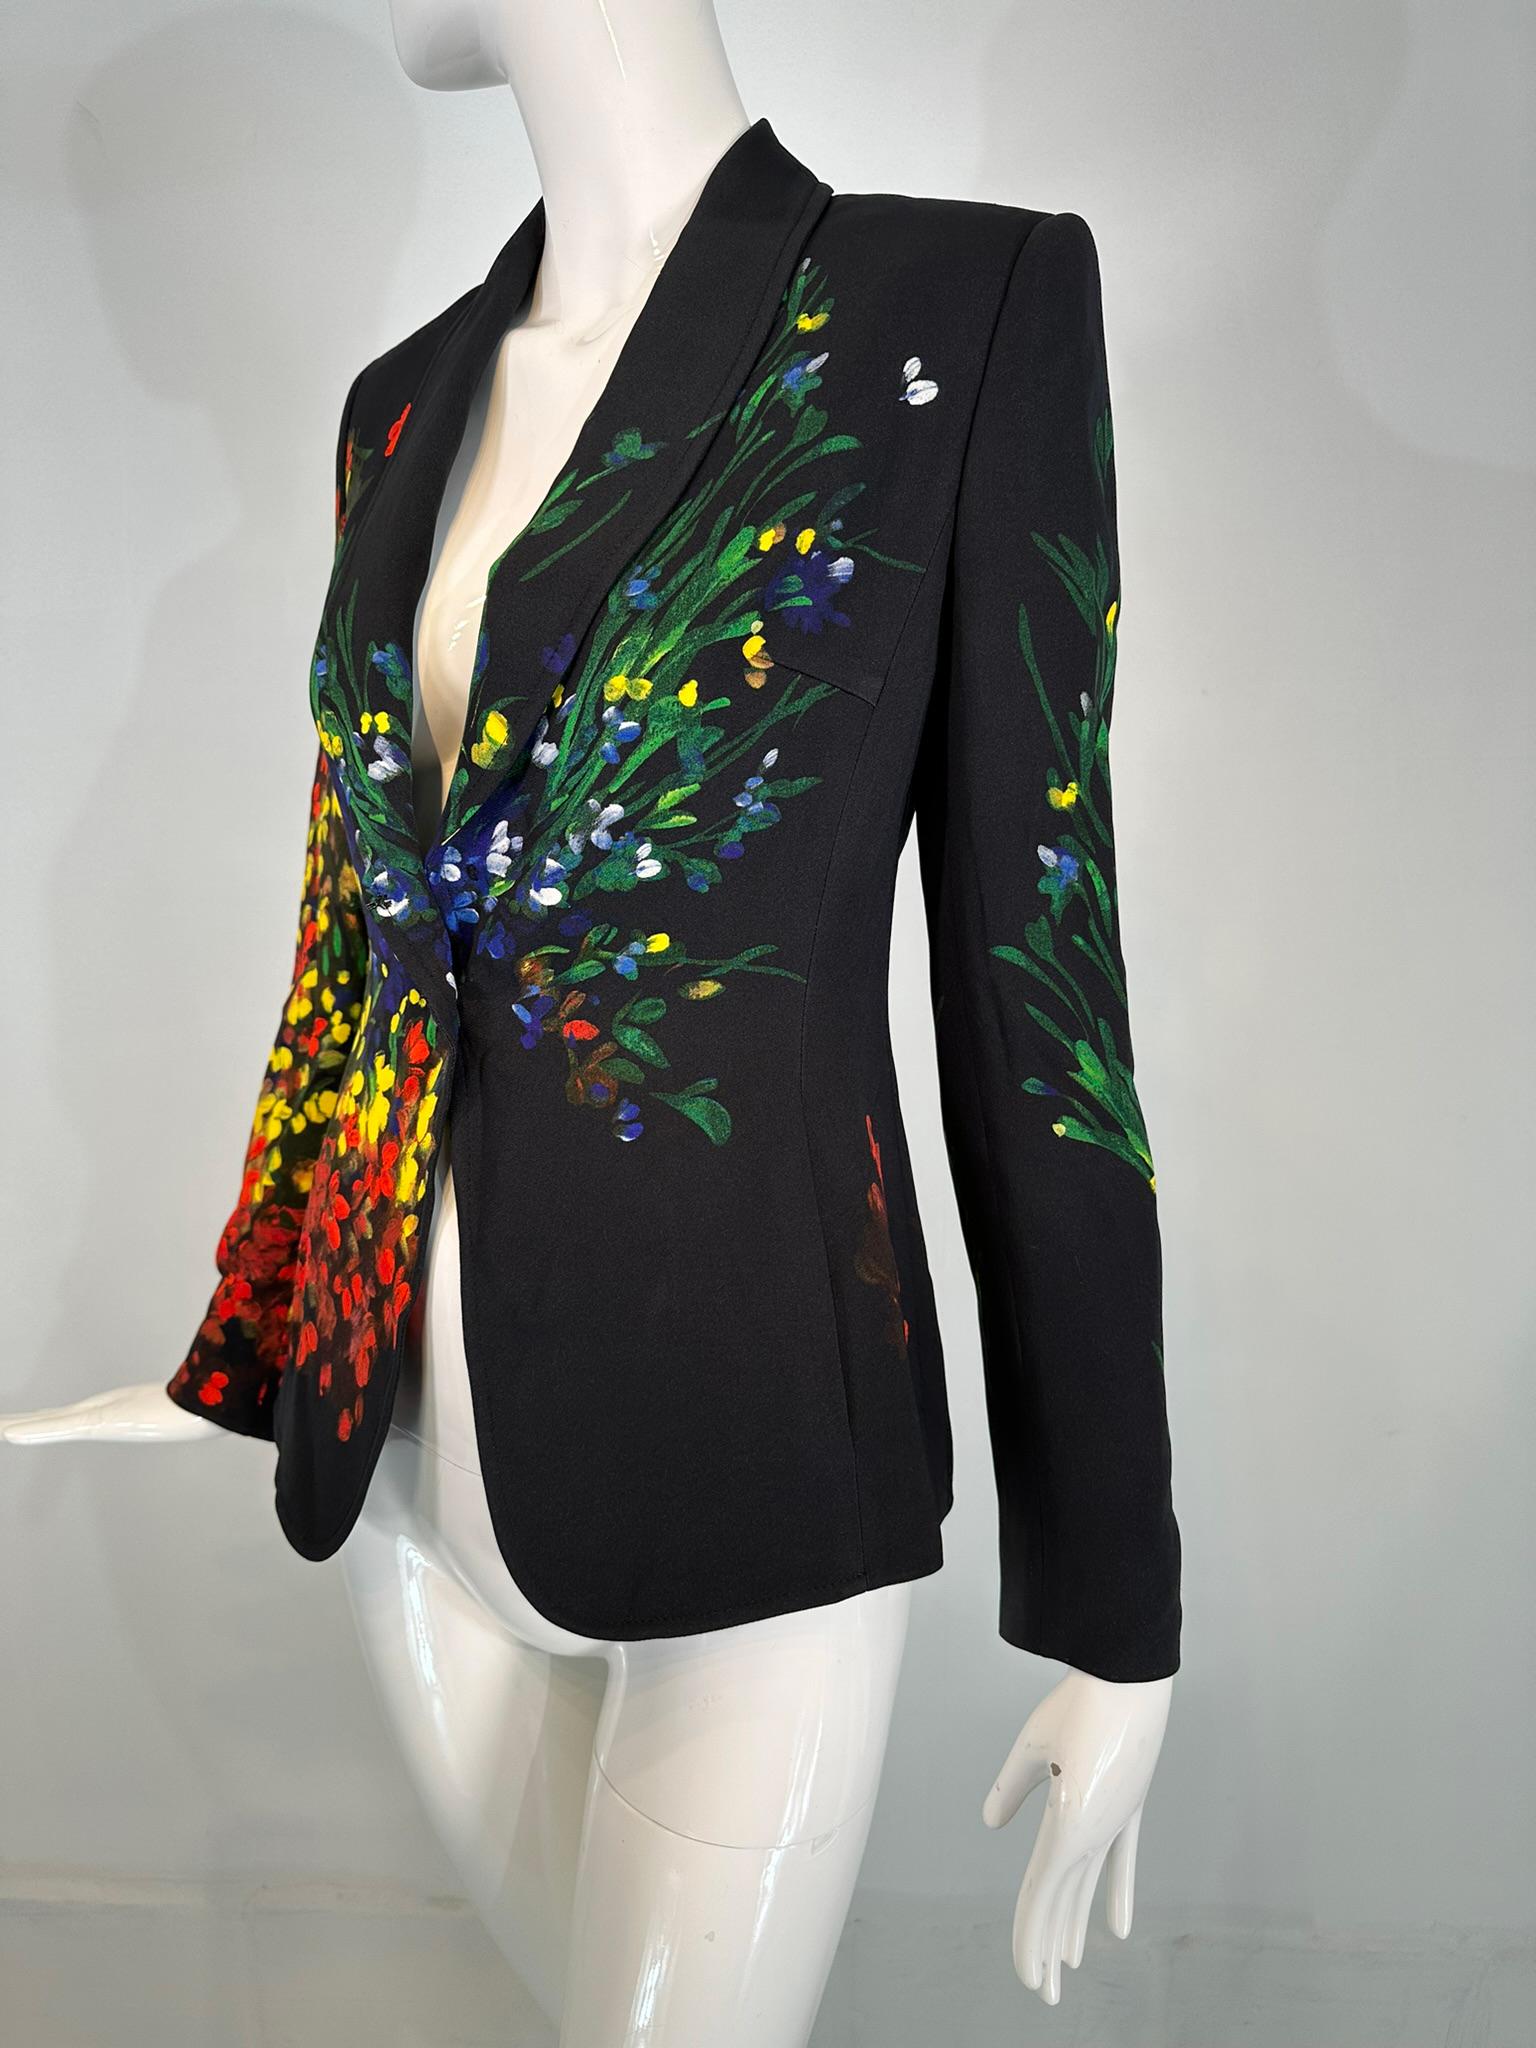 Escada floral painterly black single button notched lapel jacket. Screen printed & looks like painting. Modernist flower garden including the inside facings. The black jacket has a single button closure at the waist front, notched lapel & collar. On